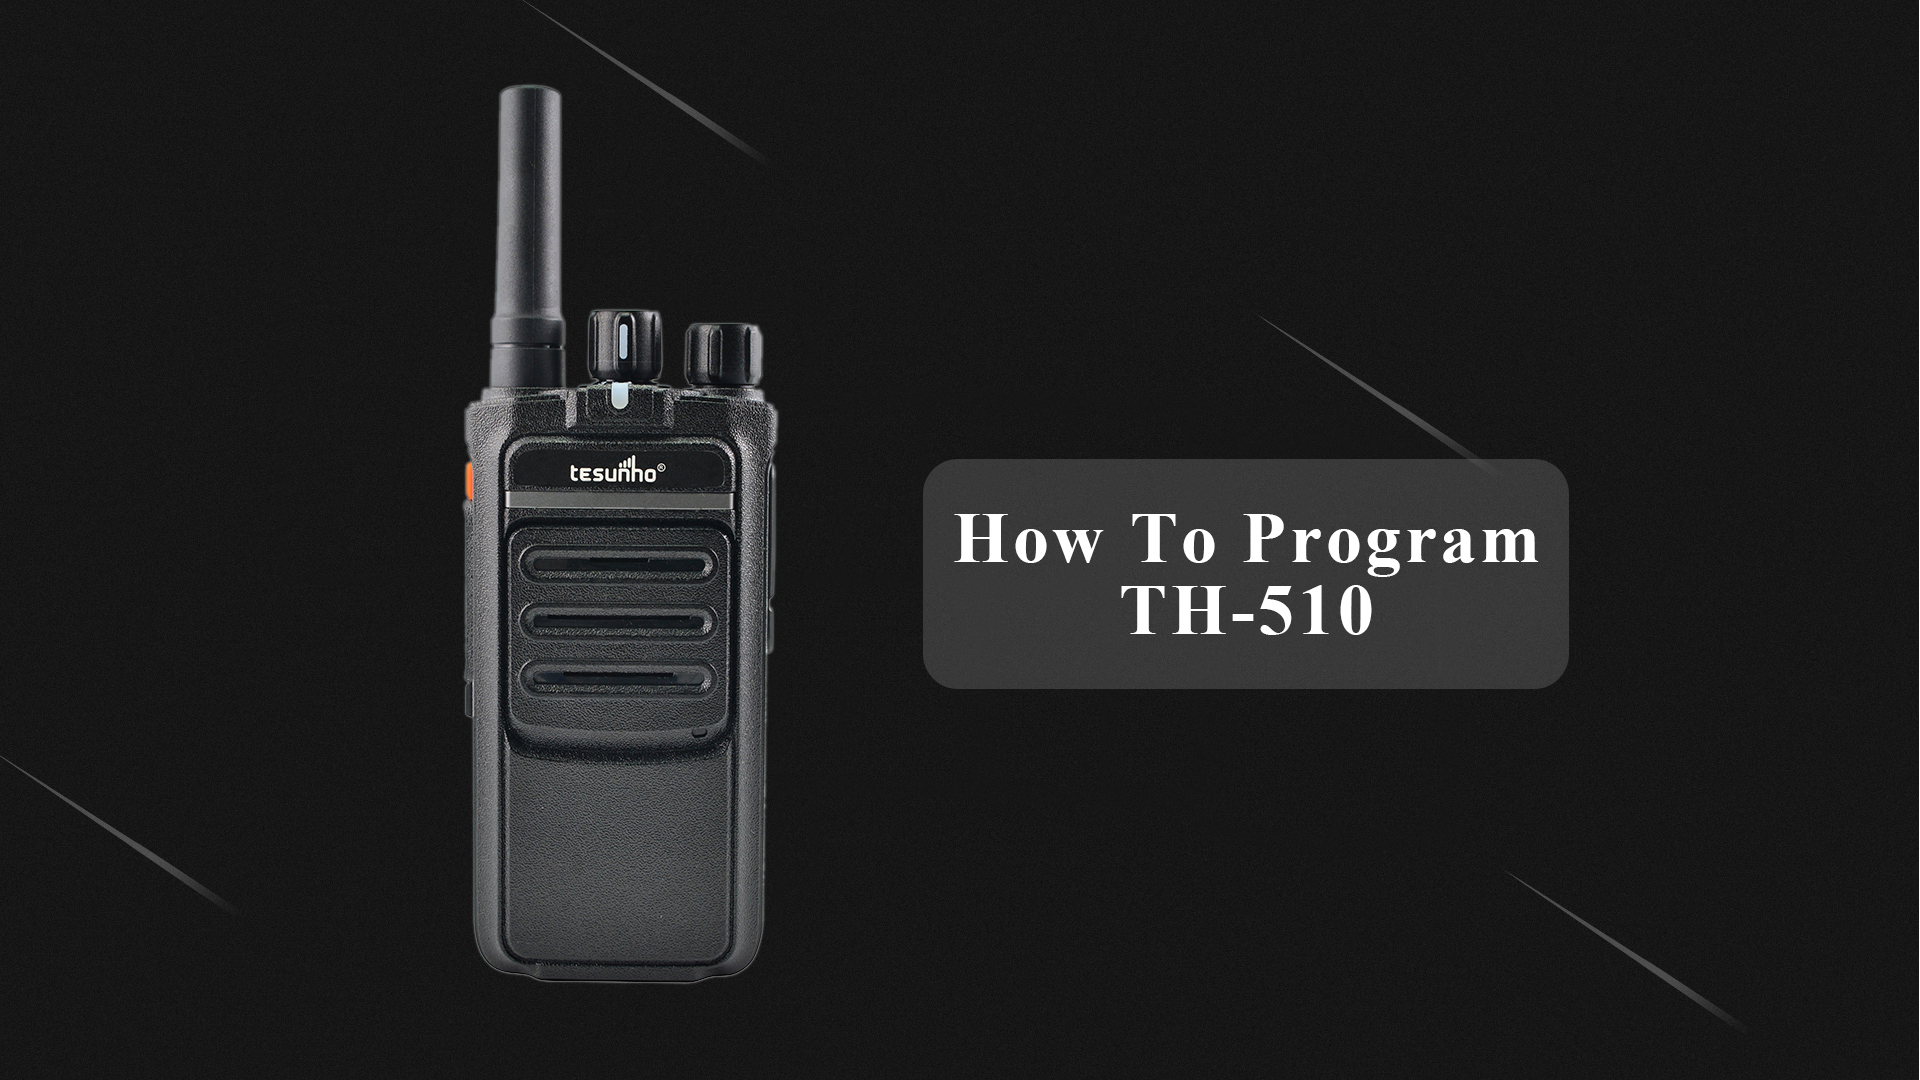 How To Program TH-510